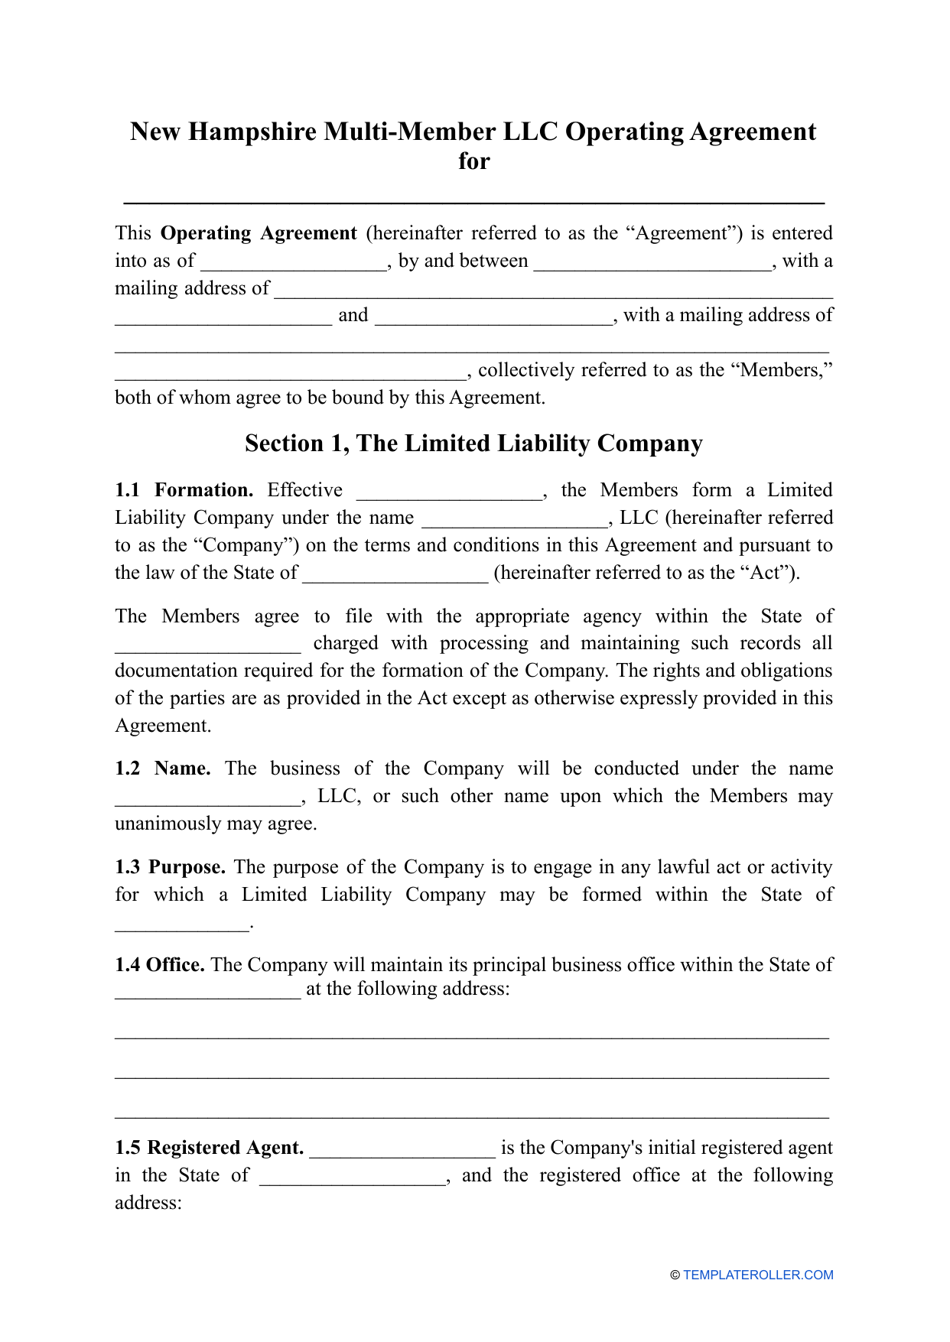 Multi-Member LLC Operating Agreement Template - New Hampshire, Page 1